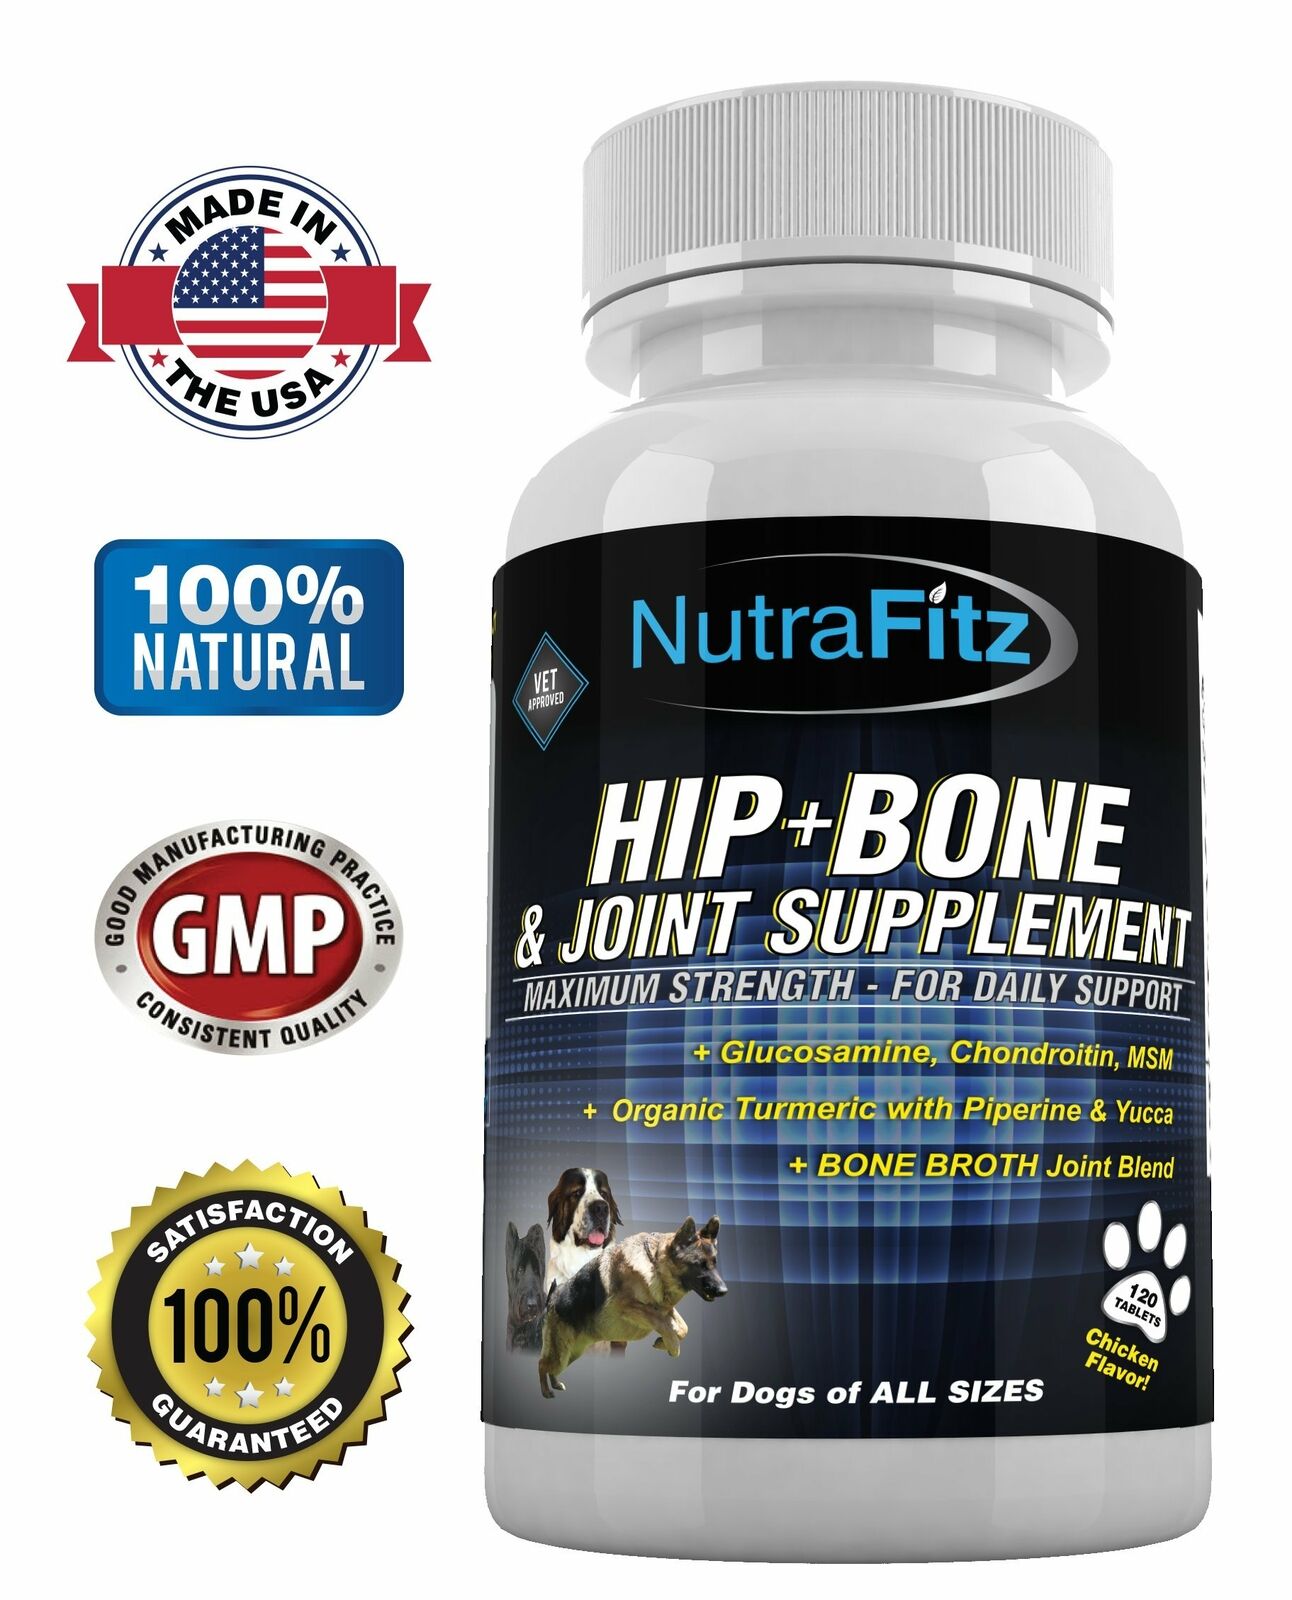 Hip Bone and Joint Supplement for Dogs